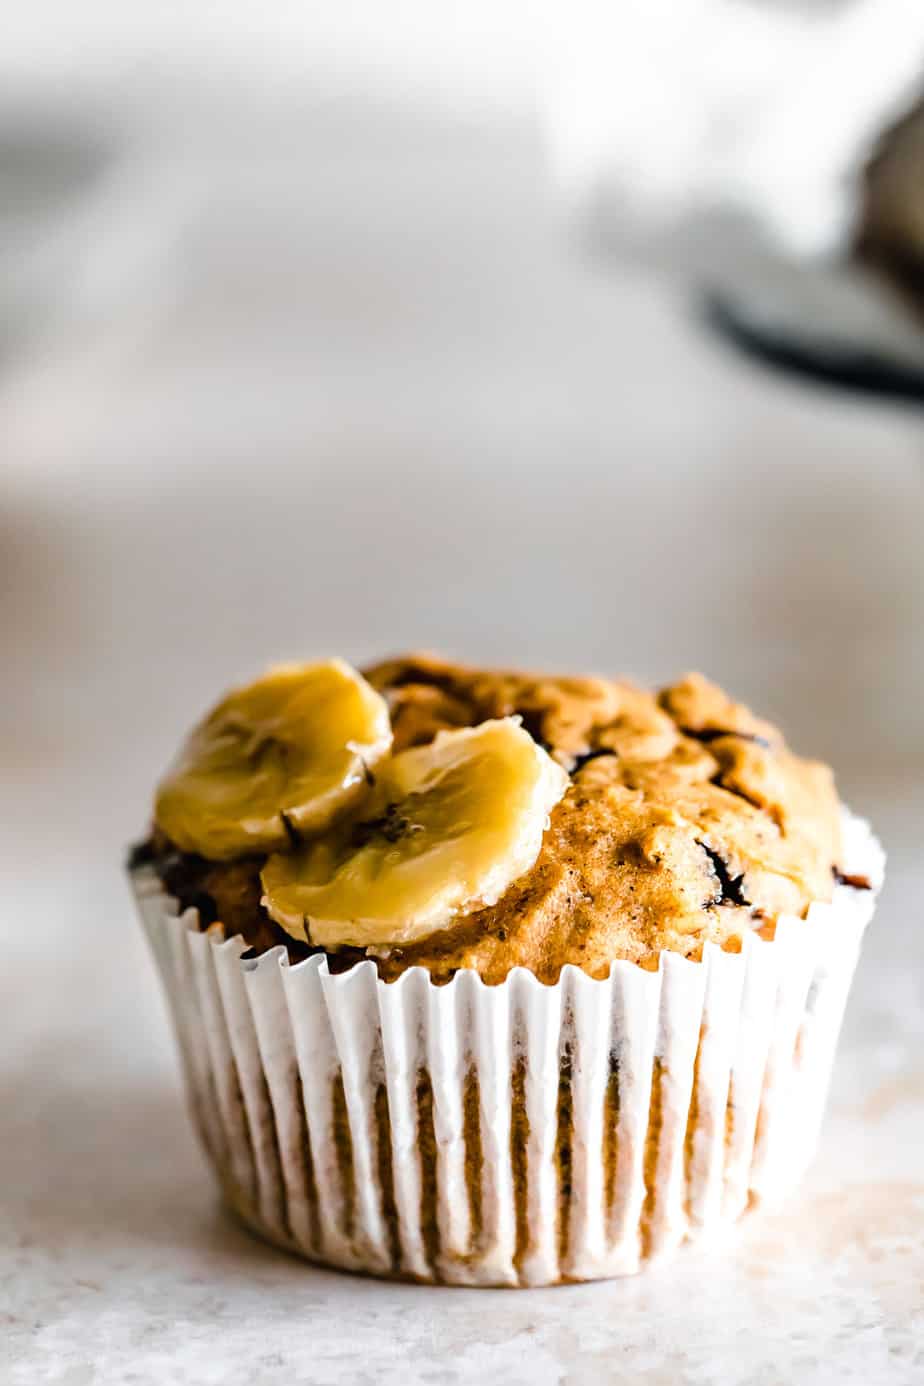 A muffin with sliced bananas on top